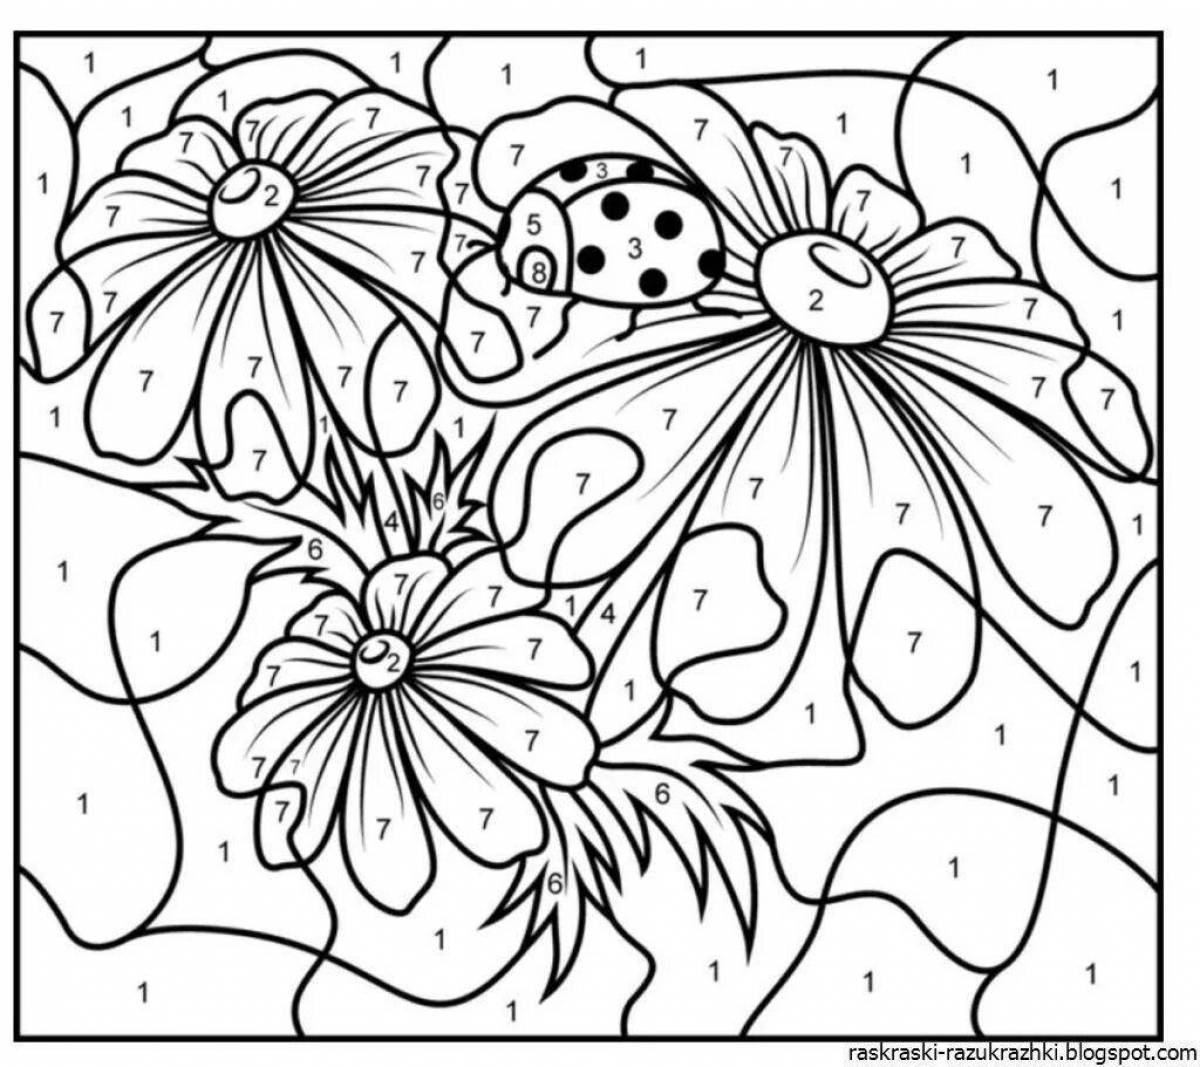 Fun coloring by numbers for printing